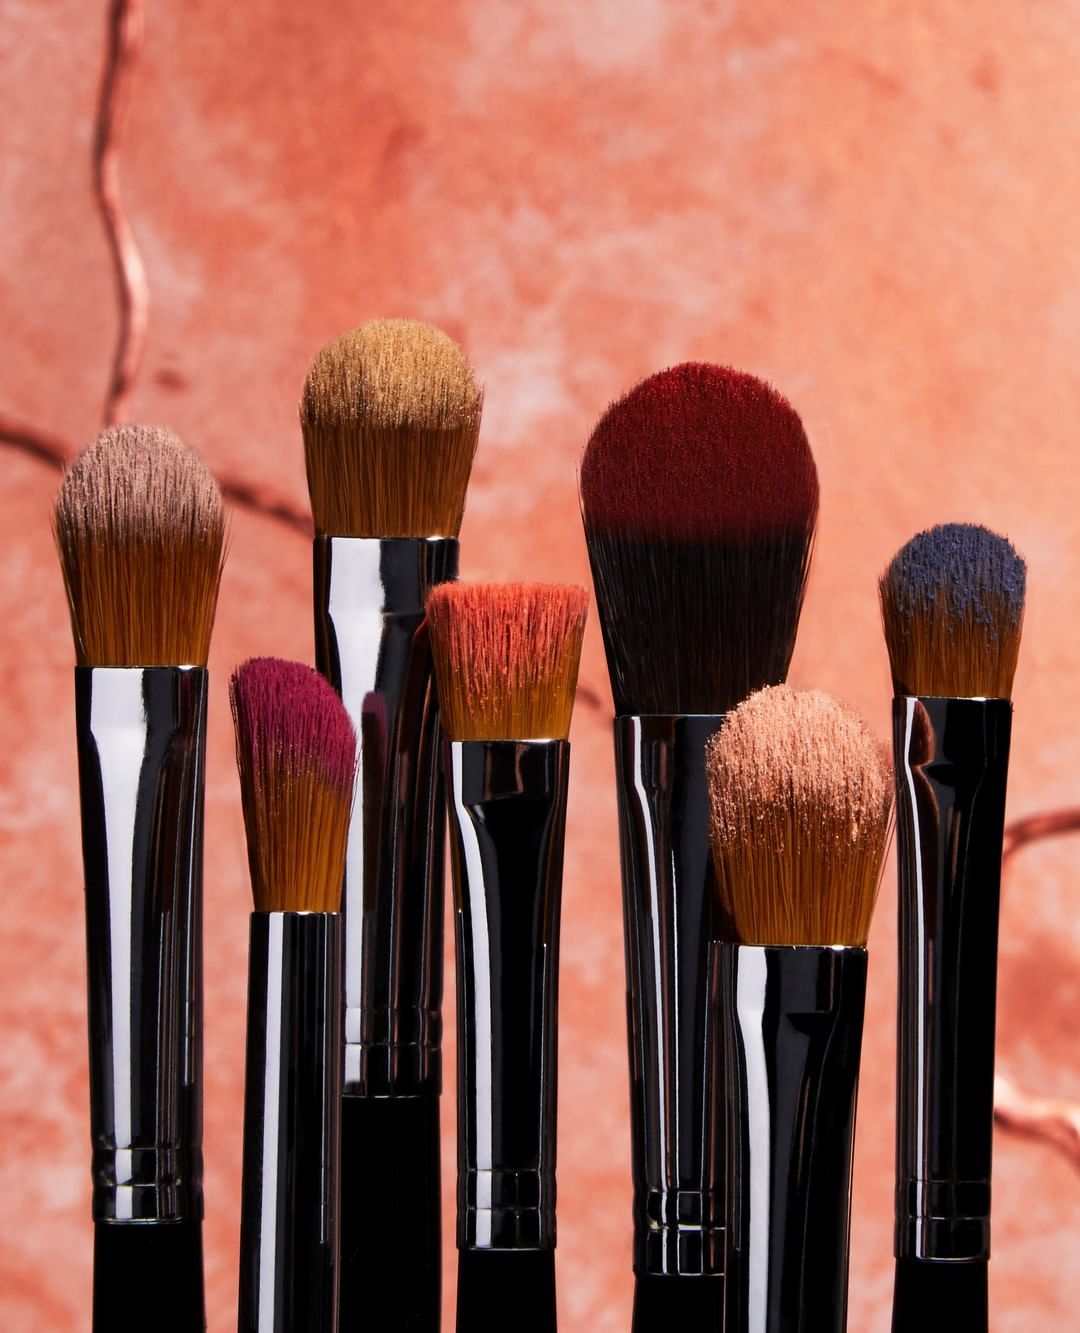 shu uemura - helping you create your ideal finish in each and every stroke. which shu brush is your favorite? #shuuemura #shuartistry #japanesemastership